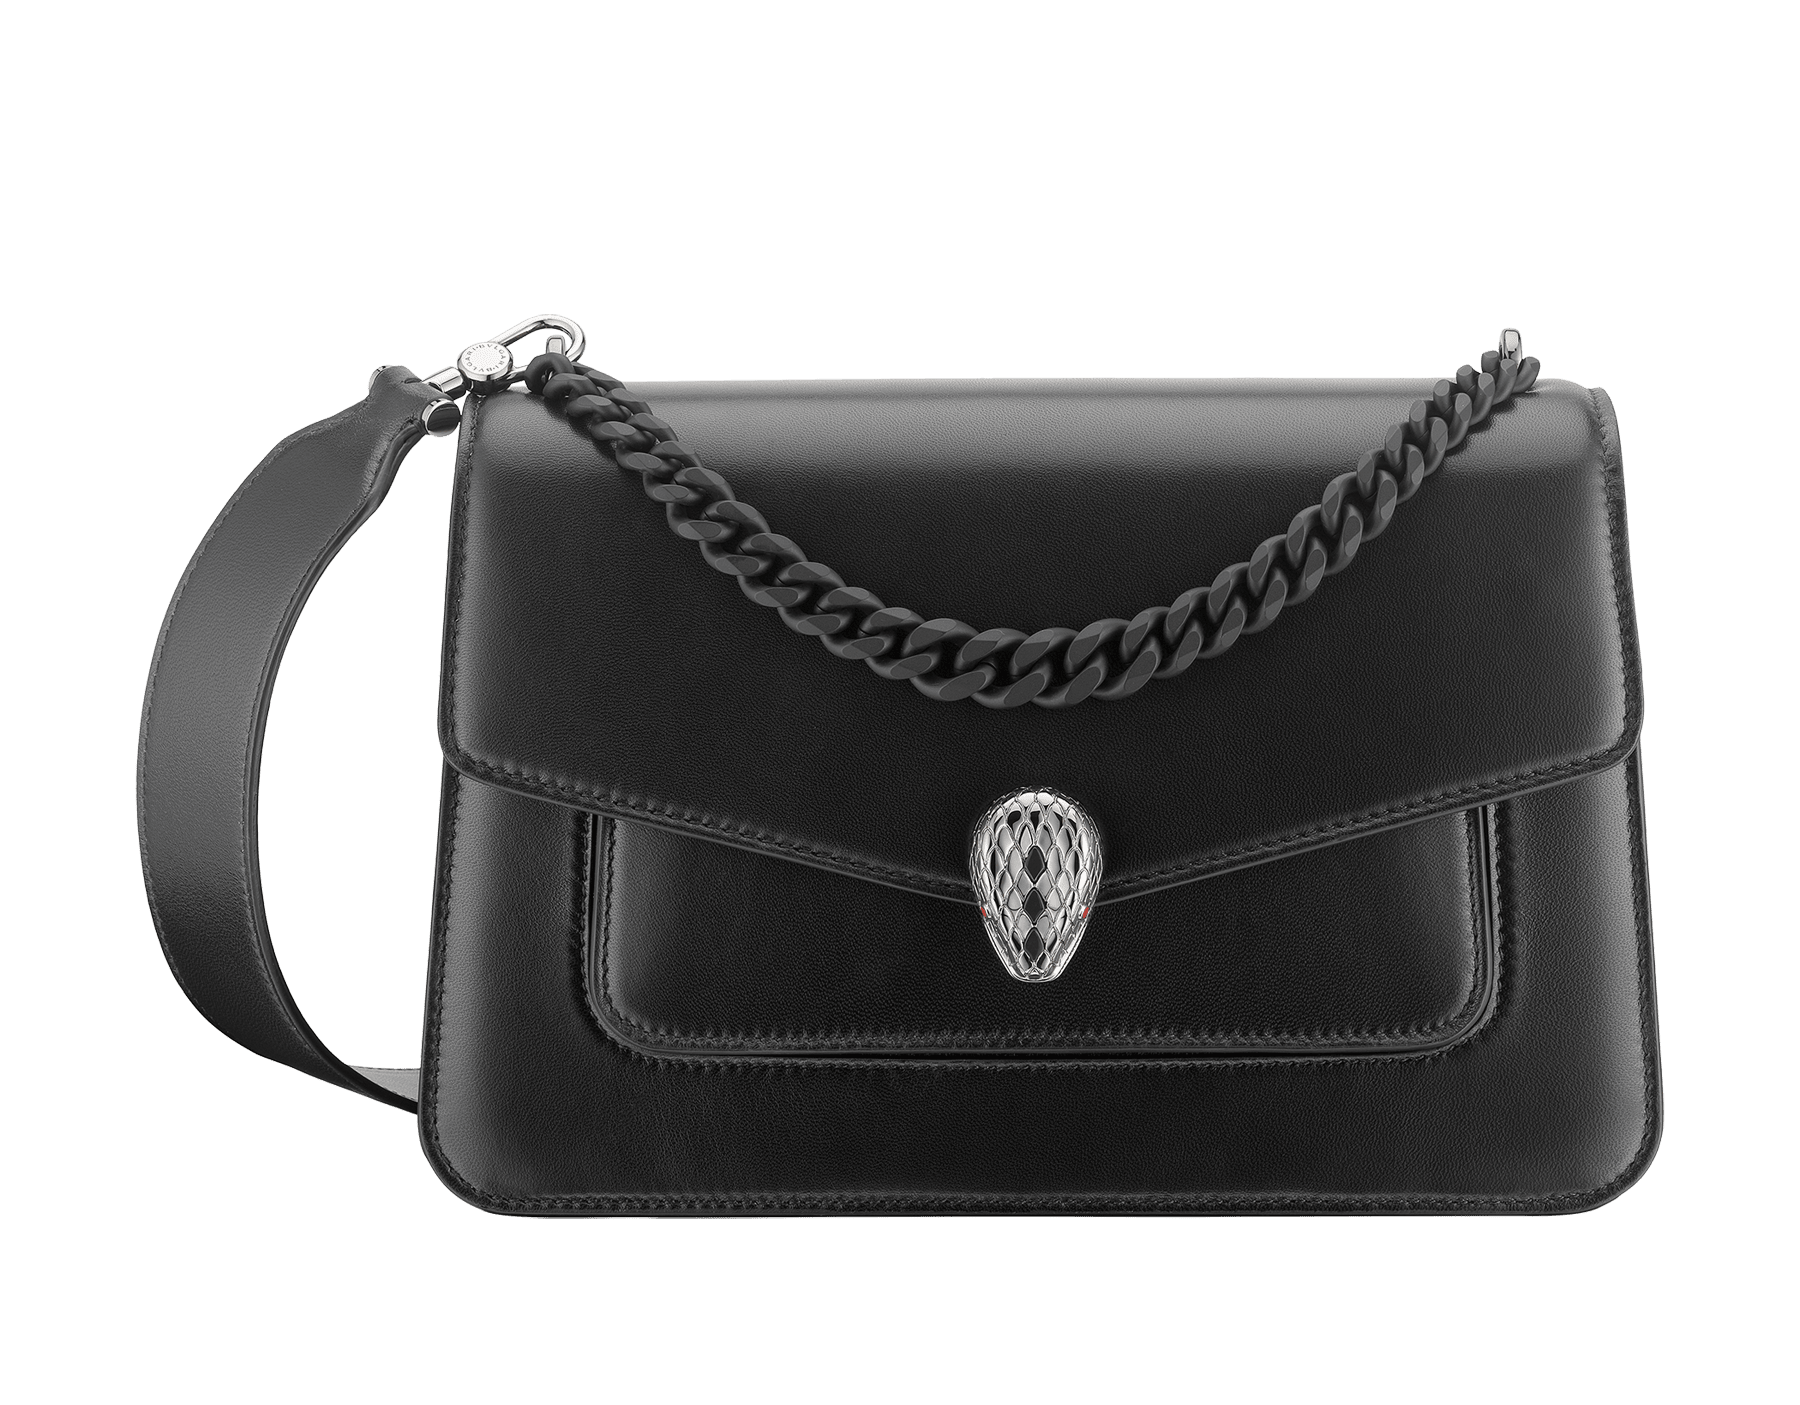 "Serpenti Forever" maxi chain crossbody bag in black nappa leather with black nappa leather inner lining. New Serpenti head closure in dark ruthenium-plated brass and finished with small black onyx scales in the middle and red enamel eyes. 1138-MCNc image 1